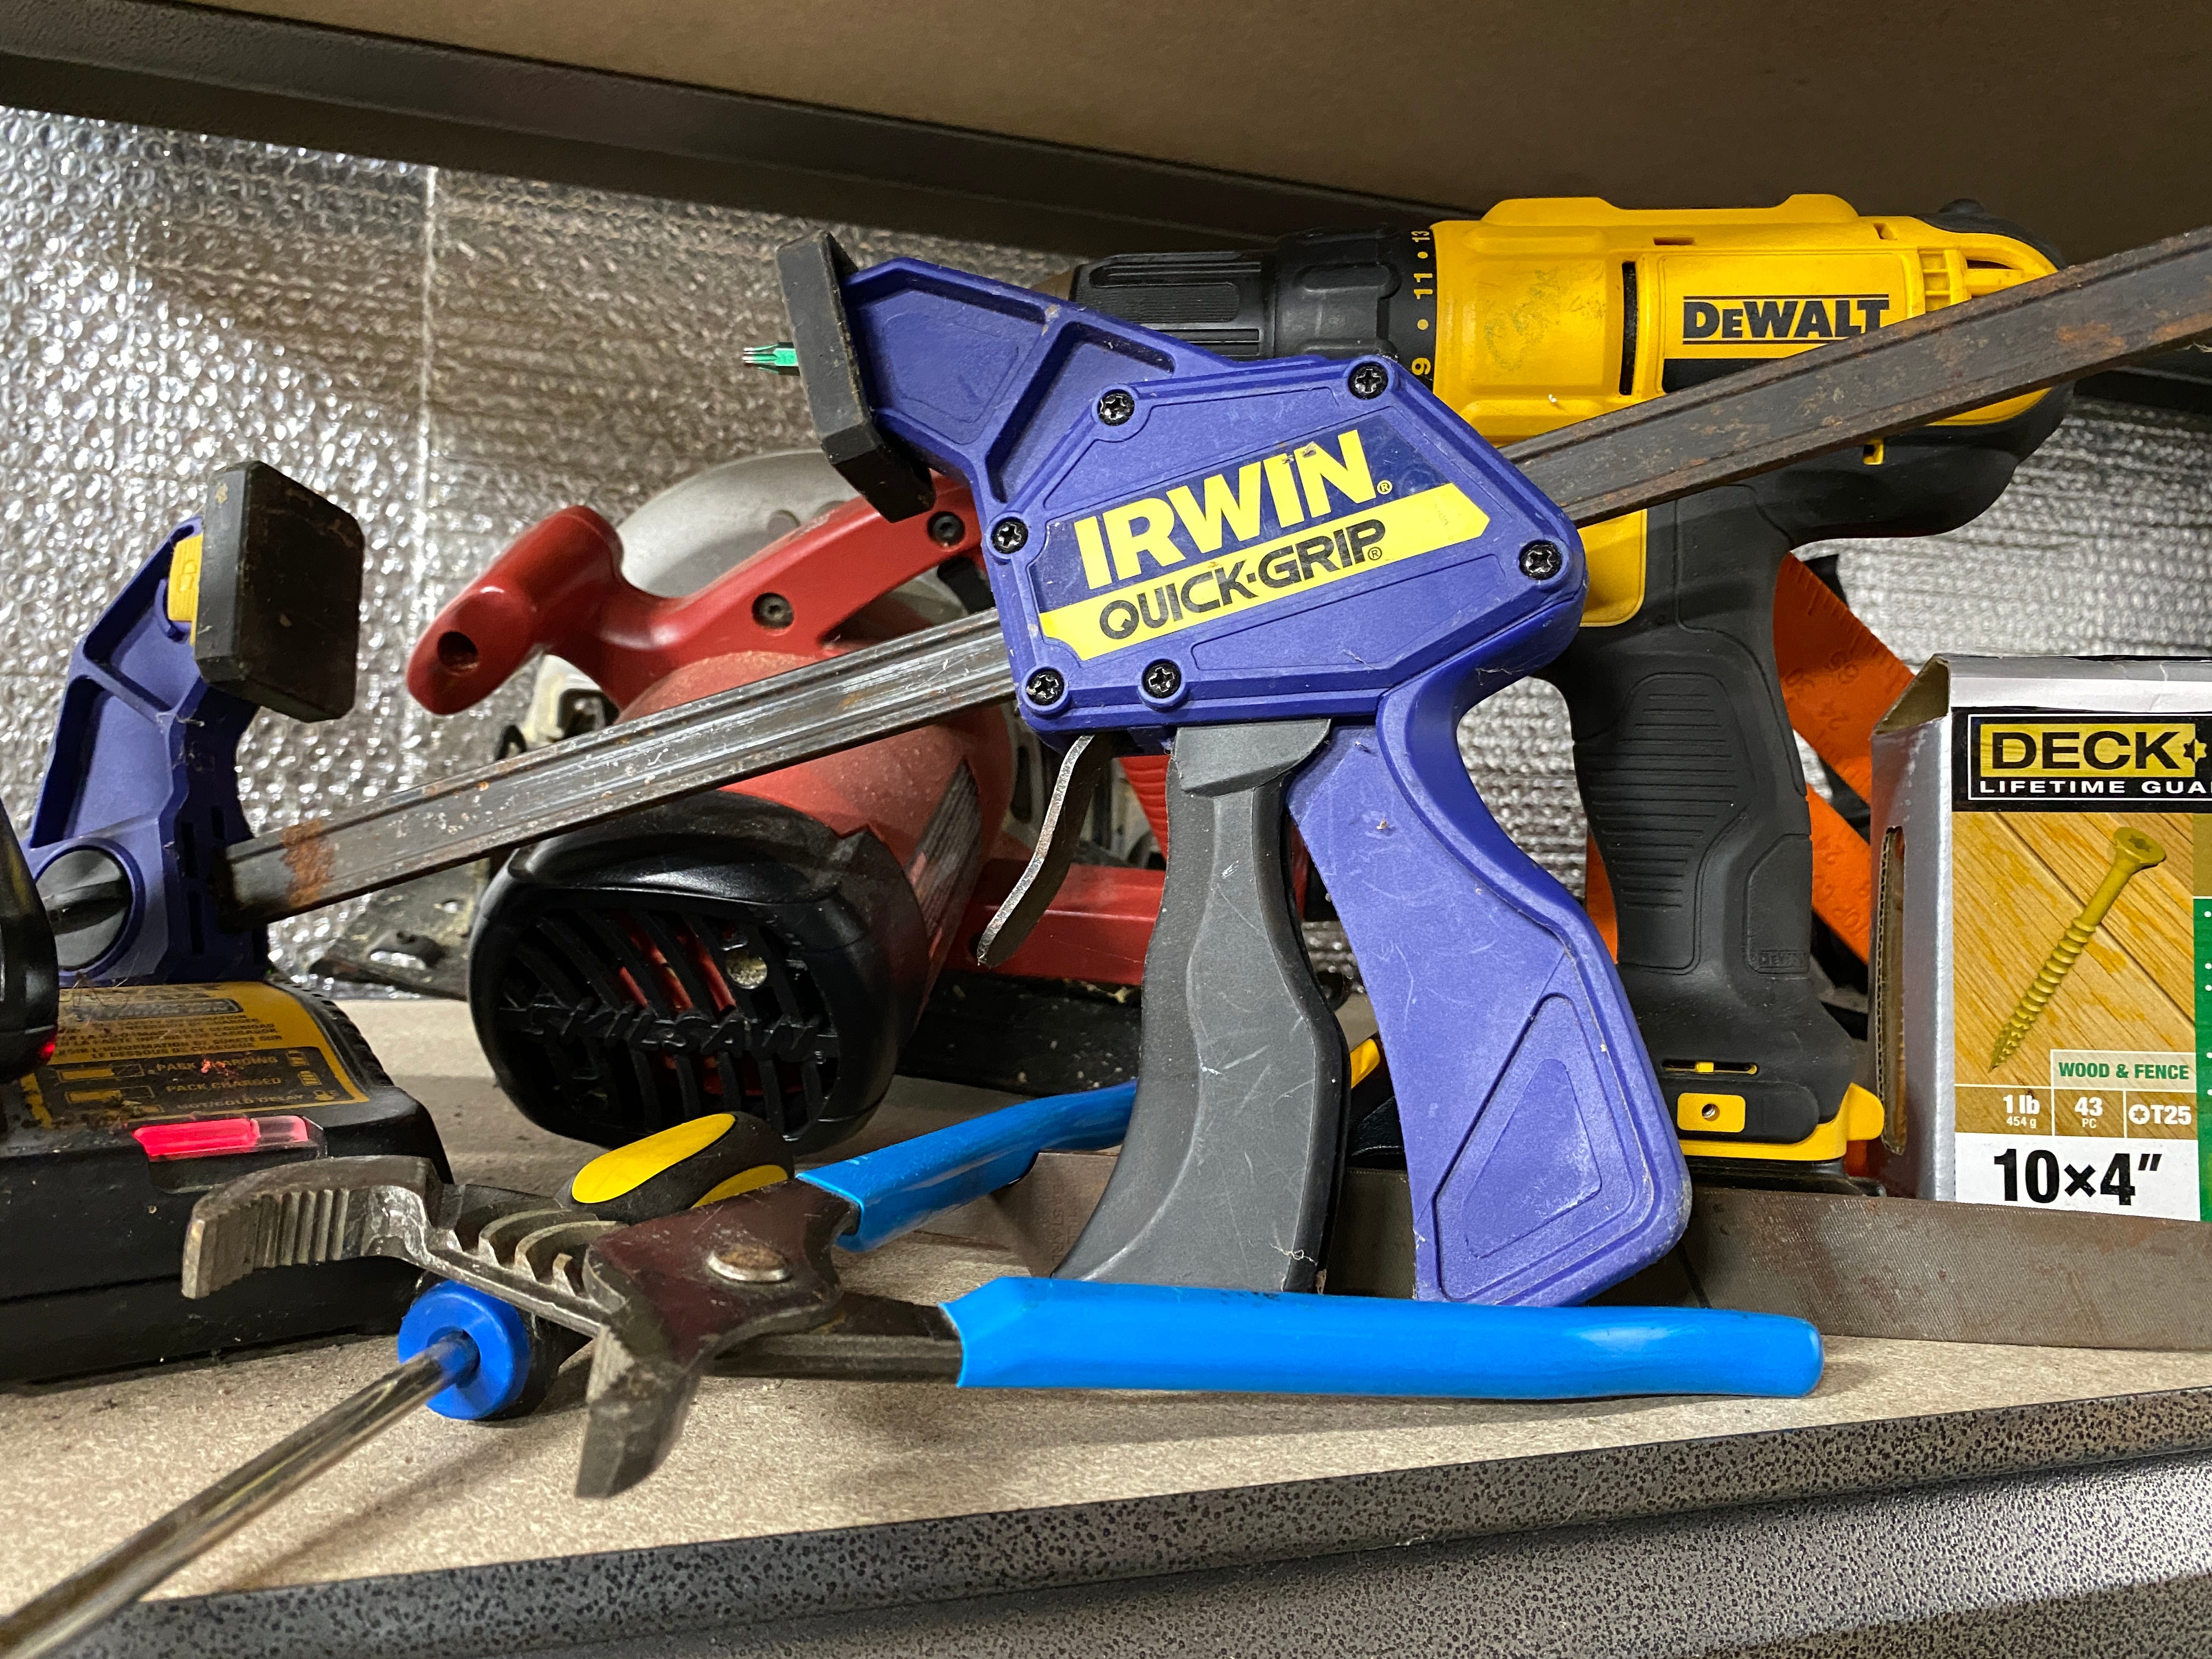 Which Utility Knife Blade Is Best? Let's find out! DeWalt, Irwin